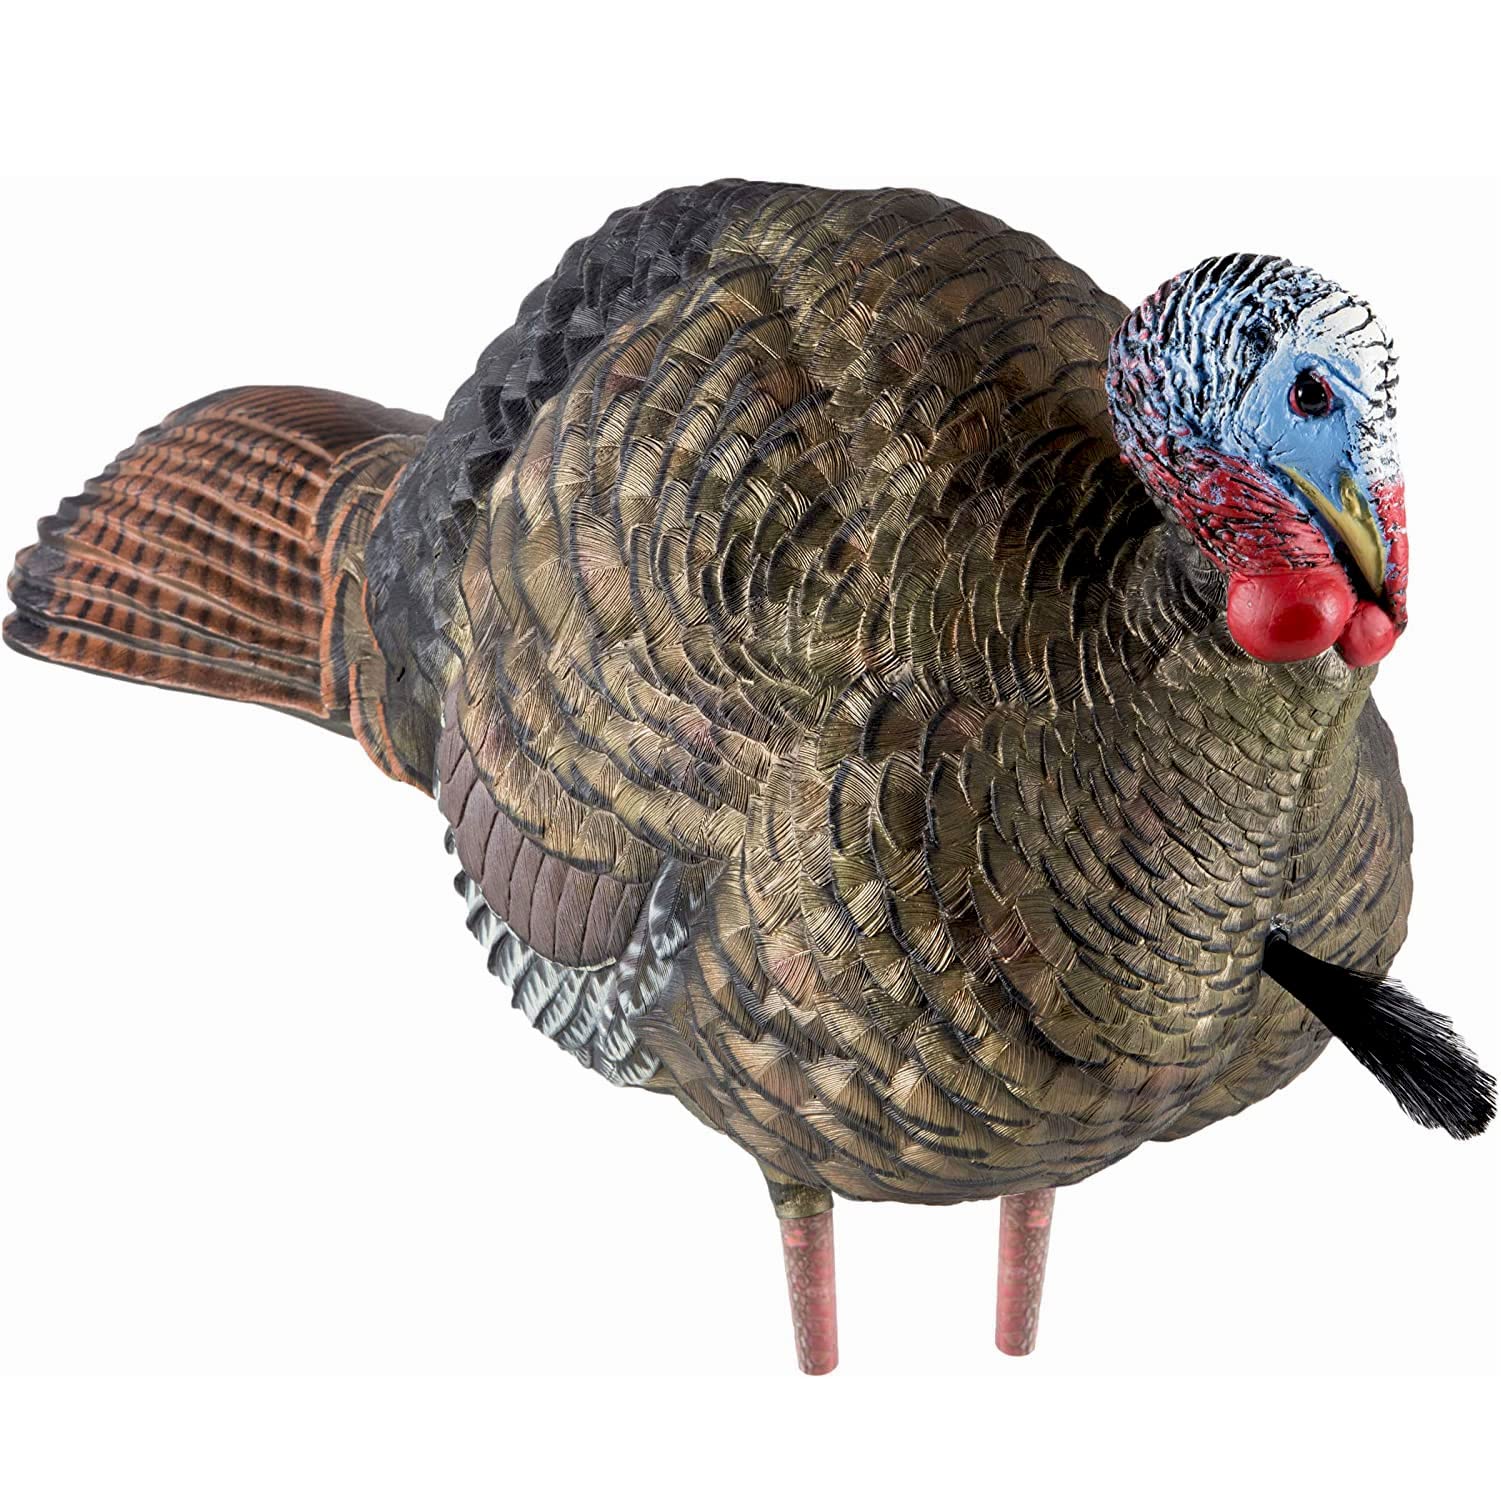 Avian-X LCD Half-Strut Jake Turkey Decoy | Durable Realistic Lifelike Collapsible Standing Hunting Decoy with Carry Bag & Stake, AVX8012